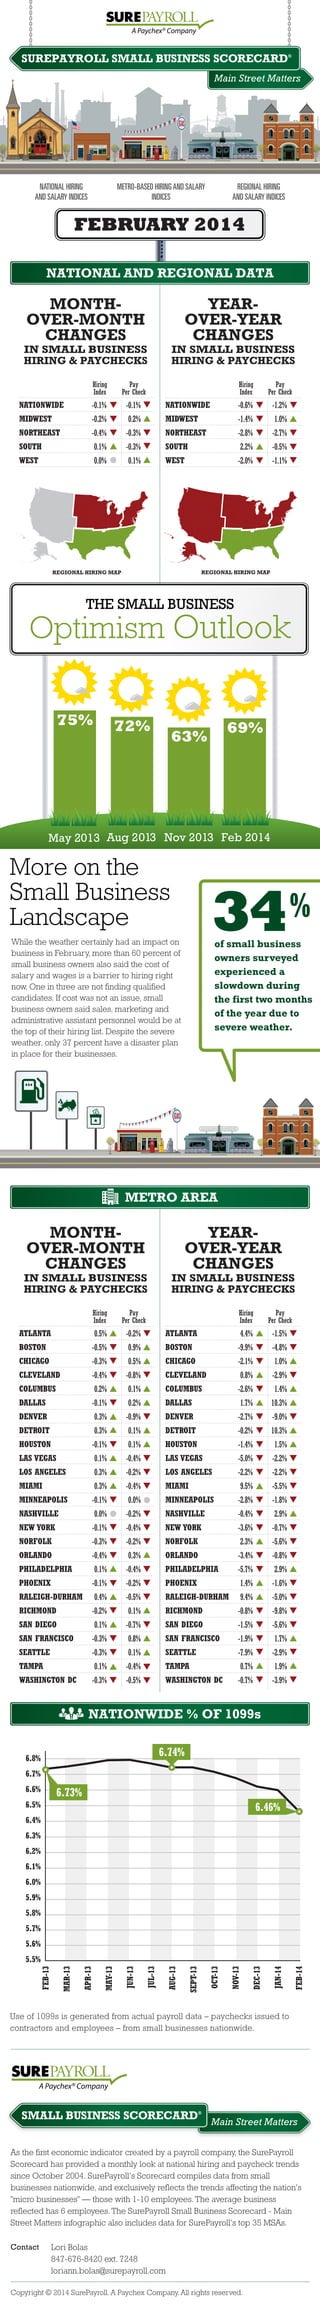 SUREPAYROLL SMALL BUSINESS SCORECARD

®

Main Street Matters

NATIONAL HIRING
AND SALARY INDICES

METRO-BASED HIRING AND SALARY
INDICES

REGIONAL HIRING
AND SALARY INDICES

FEBRUARY 2014
NATIONAL AND REGIONAL DATA

MONTHOVER-MONTH
CHANGES

YEAROVER-YEAR
CHANGES

IN SMALL BUSINESS
HIRING & PAYCHECKS
Hiring
Index

Pay
Per Check

NATIONWIDE

-0.1%

-0.1%

MIDWEST

-0.2%

NORTHEAST

IN SMALL BUSINESS
HIRING & PAYCHECKS
Hiring
Index

Pay
Per Check

NATIONWIDE

-0.6%

-1.2%

0.2%

MIDWEST

-1.4%

1.0%

-0.4%

-0.3%

NORTHEAST

-2.8%

-2.7%

SOUTH

0.1%

-0.3%

SOUTH

2.2%

-0.5%

WEST

0.0%

0.1%

WEST

-2.0%

-1.1%

REGIONAL HIRING MAP

REGIONAL HIRING MAP

THE SMALL BUSINESS

Optimism Outlook
75%

72%

69%

63%

May 2013 Aug 2013 Nov 2013 Feb 2014

More on the
Small Business
Landscape

34

While the weather certainly had an impact on
business in February, more than 60 percent of
small business owners also said the cost of
salary and wages is a barrier to hiring right
now. One in three are not finding qualified
candidates. If cost was not an issue, small
business owners said sales, marketing and
administrative assistant personnel would be at
the top of their hiring list. Despite the severe
weather, only 37 percent have a disaster plan
in place for their businesses.

%

of small business
owners surveyed
experienced a
slowdown during
the first two months
of the year due to
severe weather.

METRO AREA

MONTHOVER-MONTH
CHANGES

YEAROVER-YEAR
CHANGES

IN SMALL BUSINESS
HIRING & PAYCHECKS
Hiring
Index

Pay
Per Check

ATLANTA

0.5%

-0.2%

BOSTON

-0.5%

CHICAGO

IN SMALL BUSINESS
HIRING & PAYCHECKS
Hiring
Index

Pay
Per Check

ATLANTA

4.4%

-1.5%

0.9%

BOSTON

-9.9%

-4.8%

-0.3%

0.5%

CHICAGO

-2.1%

1.0%

CLEVELAND

-0.4%

-0.8%

CLEVELAND

0.8%

-2.9%

COLUMBUS

0.2%

0.1%

COLUMBUS

-2.6%

1.4%

DALLAS

-0.1%

0.2%

DALLAS

1.7%

10.3%

DENVER

0.3%

-0.9%

DENVER

-2.7%

-9.0%

DETROIT

0.3%

0.1%

DETROIT

-0.2%

10.3%

HOUSTON

-0.1%

0.1%

HOUSTON

-1.4%

1.5%

LAS VEGAS

0.1%

-0.4%

LAS VEGAS

-5.0%

-2.2%

LOS ANGELES

0.3%

-0.2%

LOS ANGELES

-2.2%

-2.2%

MIAMI

0.3%

-0.4%

MIAMI

9.5%

-5.5%

MINNEAPOLIS

-0.1%

0.0%

MINNEAPOLIS

-2.8%

-1.8%

NASHVILLE

0.0%

-0.2%

NASHVILLE

-0.4%

2.9%

NEW YORK

-0.1%

-0.4%

NEW YORK

-3.6%

-0.7%

NORFOLK

-0.3%

-0.2%

NORFOLK

2.3%

-5.6%

ORLANDO

-0.4%

0.3%

ORLANDO

-3.4%

-0.8%

PHILADELPHIA

0.1%

-0.4%

PHILADELPHIA

-5.7%

2.9%

PHOENIX

-0.1%

-0.2%

PHOENIX

1.4%

-1.6%

RALEIGH-DURHAM

0.4%

-0.5%

RALEIGH-DURHAM

9.4%

-5.0%

RICHMOND

-0.2%

0.1%

RICHMOND

-0.8%

-9.8%

SAN DIEGO

0.1%

-0.7%

SAN DIEGO

-1.5%

-5.6%

SAN FRANCISCO

-0.3%

0.8%

SAN FRANCISCO

-1.9%

1.7%

SEATTLE

-0.3%

0.1%

SEATTLE

-7.9%

-2.9%

TAMPA

0.1%

-0.4%

TAMPA

0.7%

1.9%

WASHINGTON DC

-0.3%

-0.5%

WASHINGTON DC

-0.7%

-3.9%

NATIONWIDE % OF 1099s
6.74%

6.8%
6.7%
6.6%

6.73%

6.5%

6.46%

6.4%
6.3%
6.2%
6.1%
6.0%
5.9%
5.8%
5.7%
5.6%
FEB-14

JAN-14

DEC-13

NOV-13

OCT-13

SEPT-13

AUG-13

JUL-13

JUN-13

MAY-13

APR-13

MAR-13

FEB-13

5.5%

Use of 1099s is generated from actual payroll data – paychecks issued to
contractors and employees – from small businesses nationwide.

SMALL BUSINESS SCORECARD

®

Main Street Matters

As the first economic indicator created by a payroll company, the SurePayroll
Scorecard has provided a monthly look at national hiring and paycheck trends
since October 2004. SurePayroll's Scorecard compiles data from small
businesses nationwide, and exclusively reflects the trends affecting the nation's
"micro businesses" — those with 1-10 employees. The average business
reflected has 6 employees. The SurePayroll Small Business Scorecard - Main
Street Matters infographic also includes data for SurePayroll's top 35 MSAs.
Contact

Lori Bolas
847-676-8420 ext. 7248
loriann.bolas@surepayroll.com

Copyright © 2014 SurePayroll. A Paychex Company. All rights reserved.

 